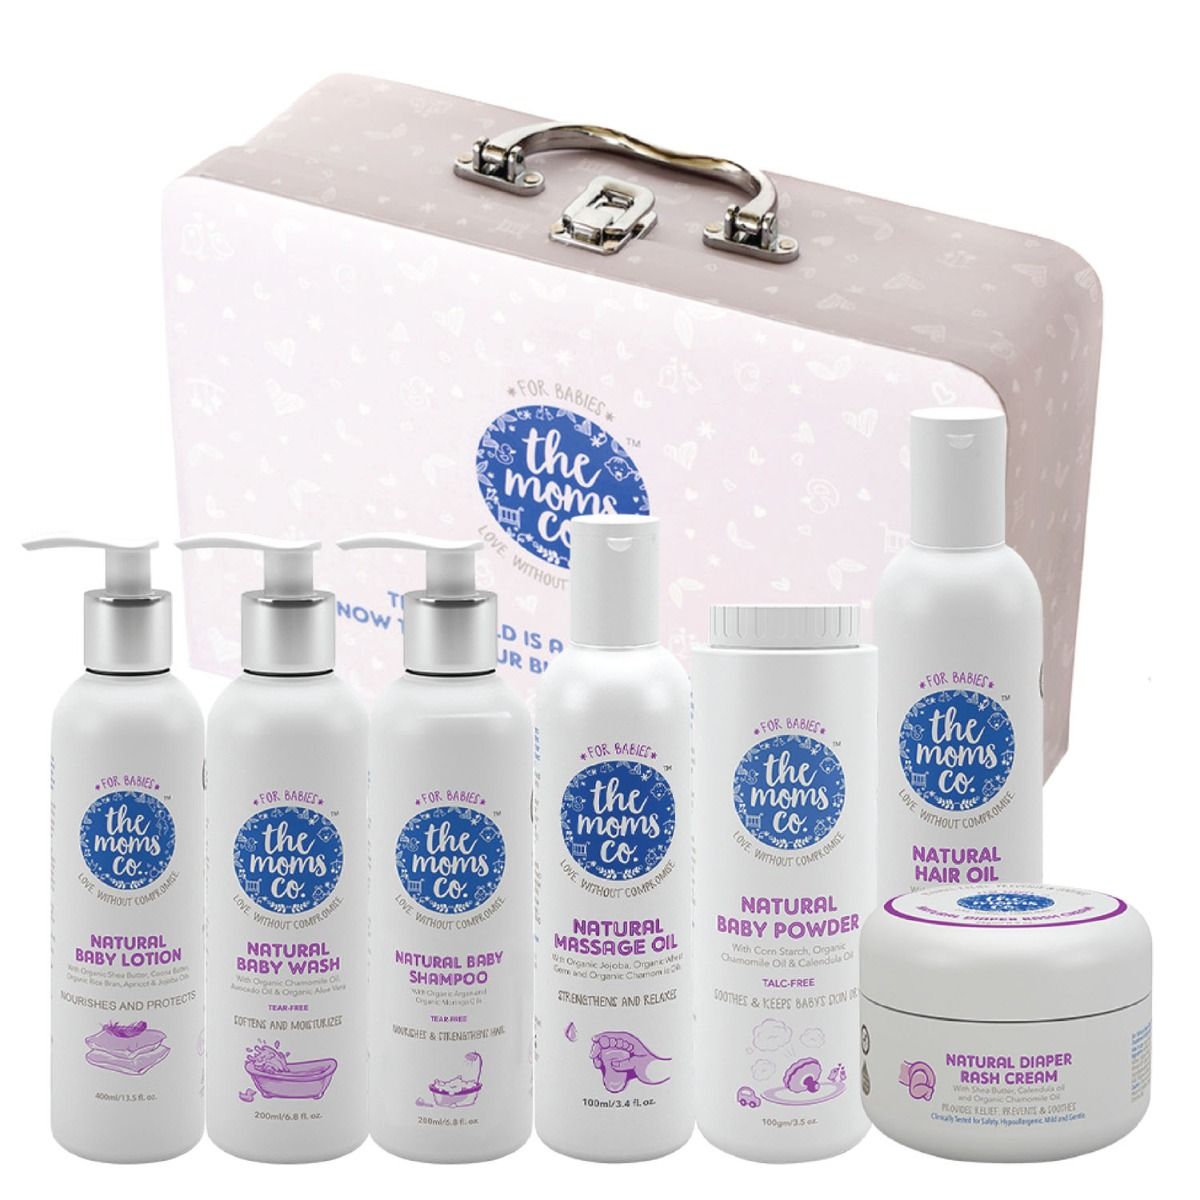 Buy The Moms Co. Everything for Baby Suitcase Gift Box, 7 Gift Items Online